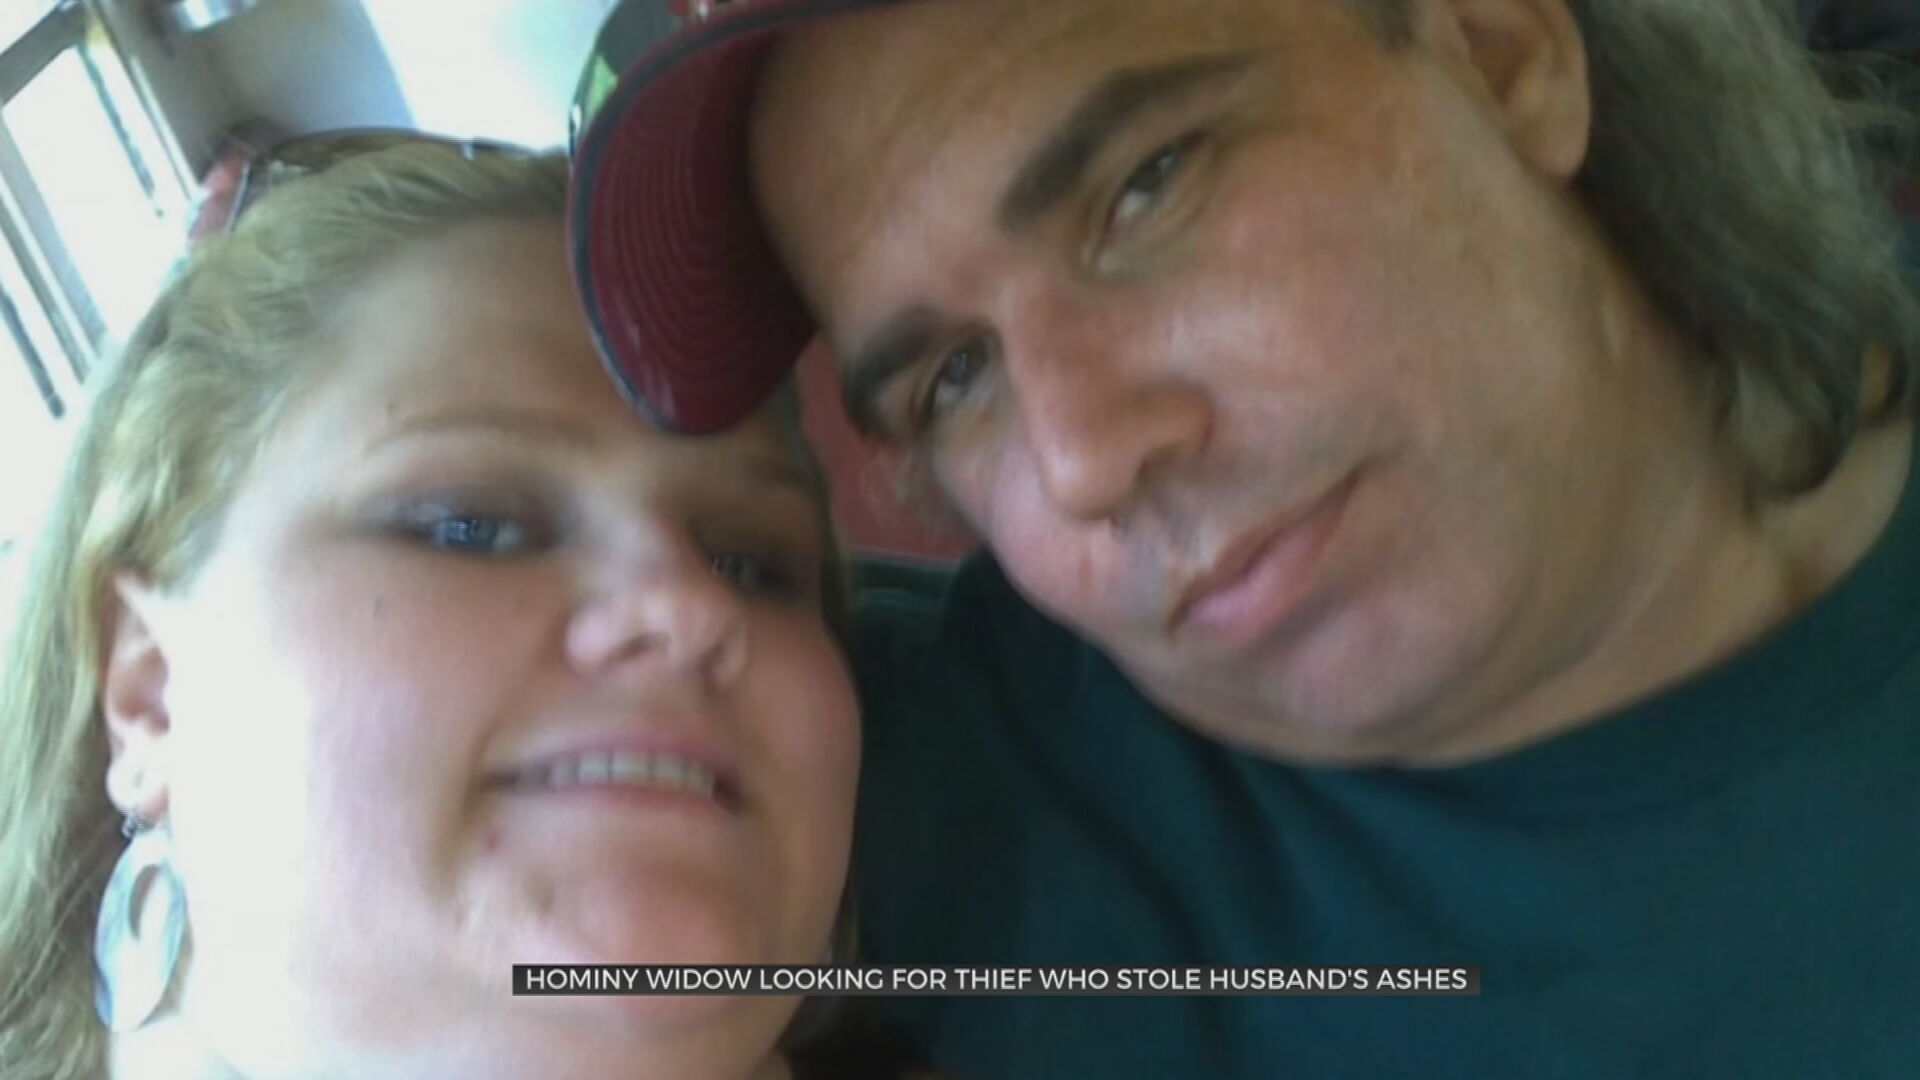 Hominy Widow Heartbroken, Searching For Thief Who Stole Husband’s Ashes 